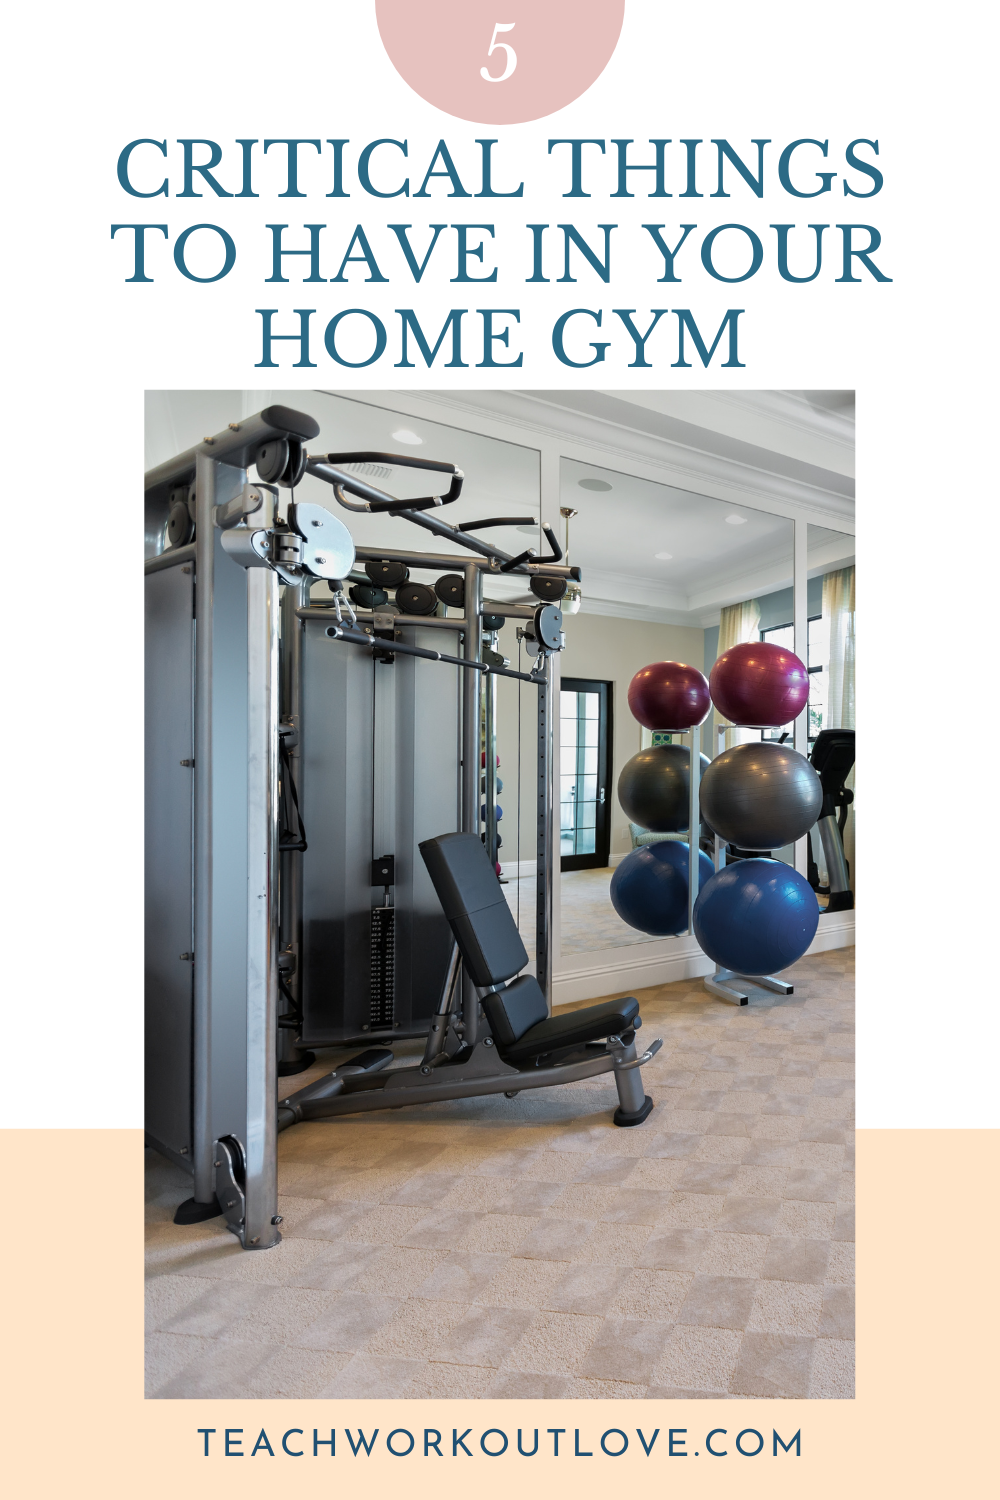 What you fill your gym with will depend on the fitness goals you have and the exercises you prefer. There are options to accommodate even the most modest of spaces, so think outside the box to come up with the most suitable options. 